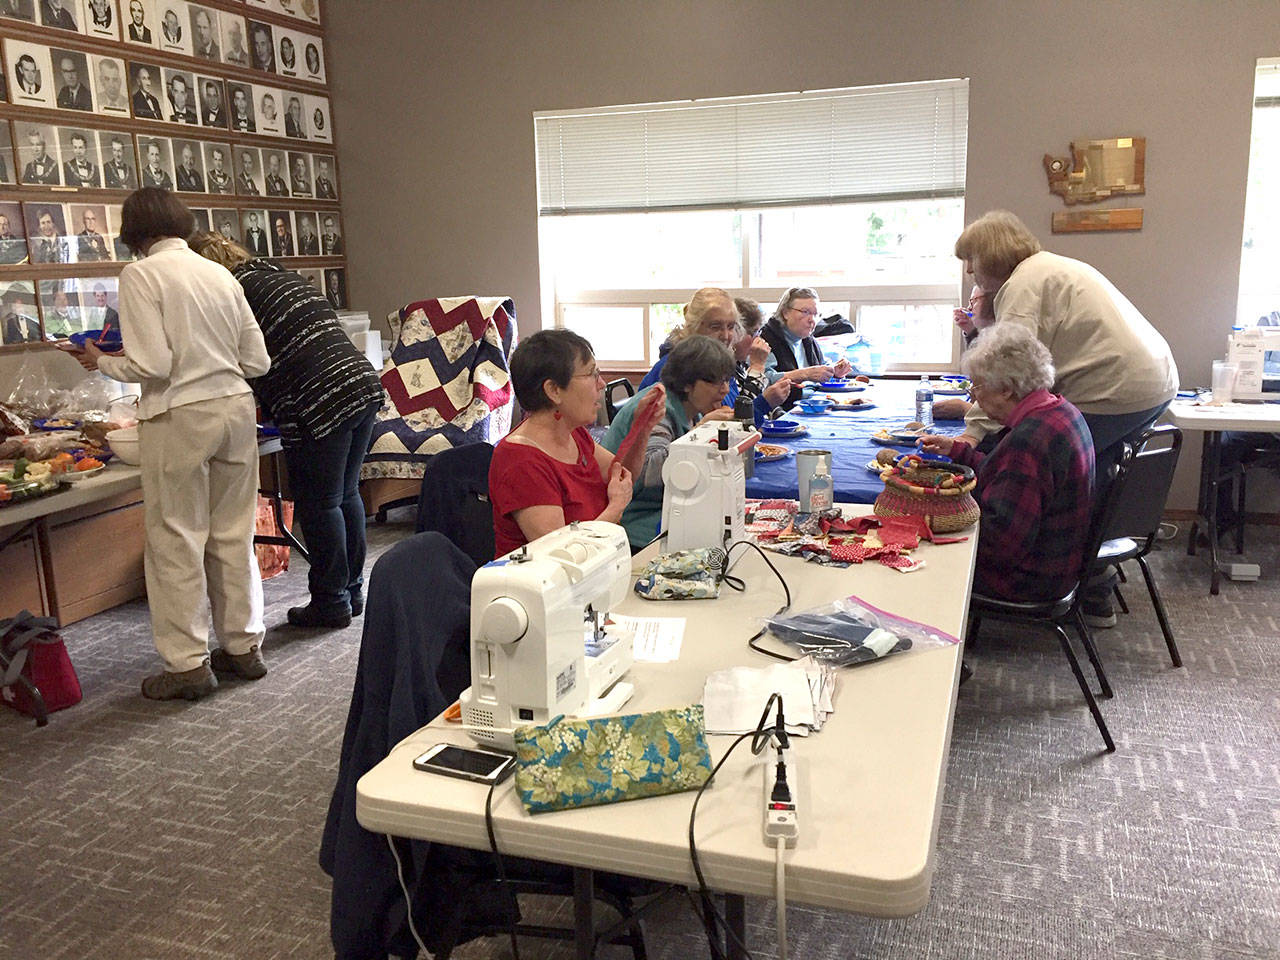 A group of quilters, including Susan Travis, Kathy Legarsky, Billie Carter, Ginny Moynihan and Connie Deckman, can be seen sewing for Jefferson County Quilts of Valor. (Chris Bates)